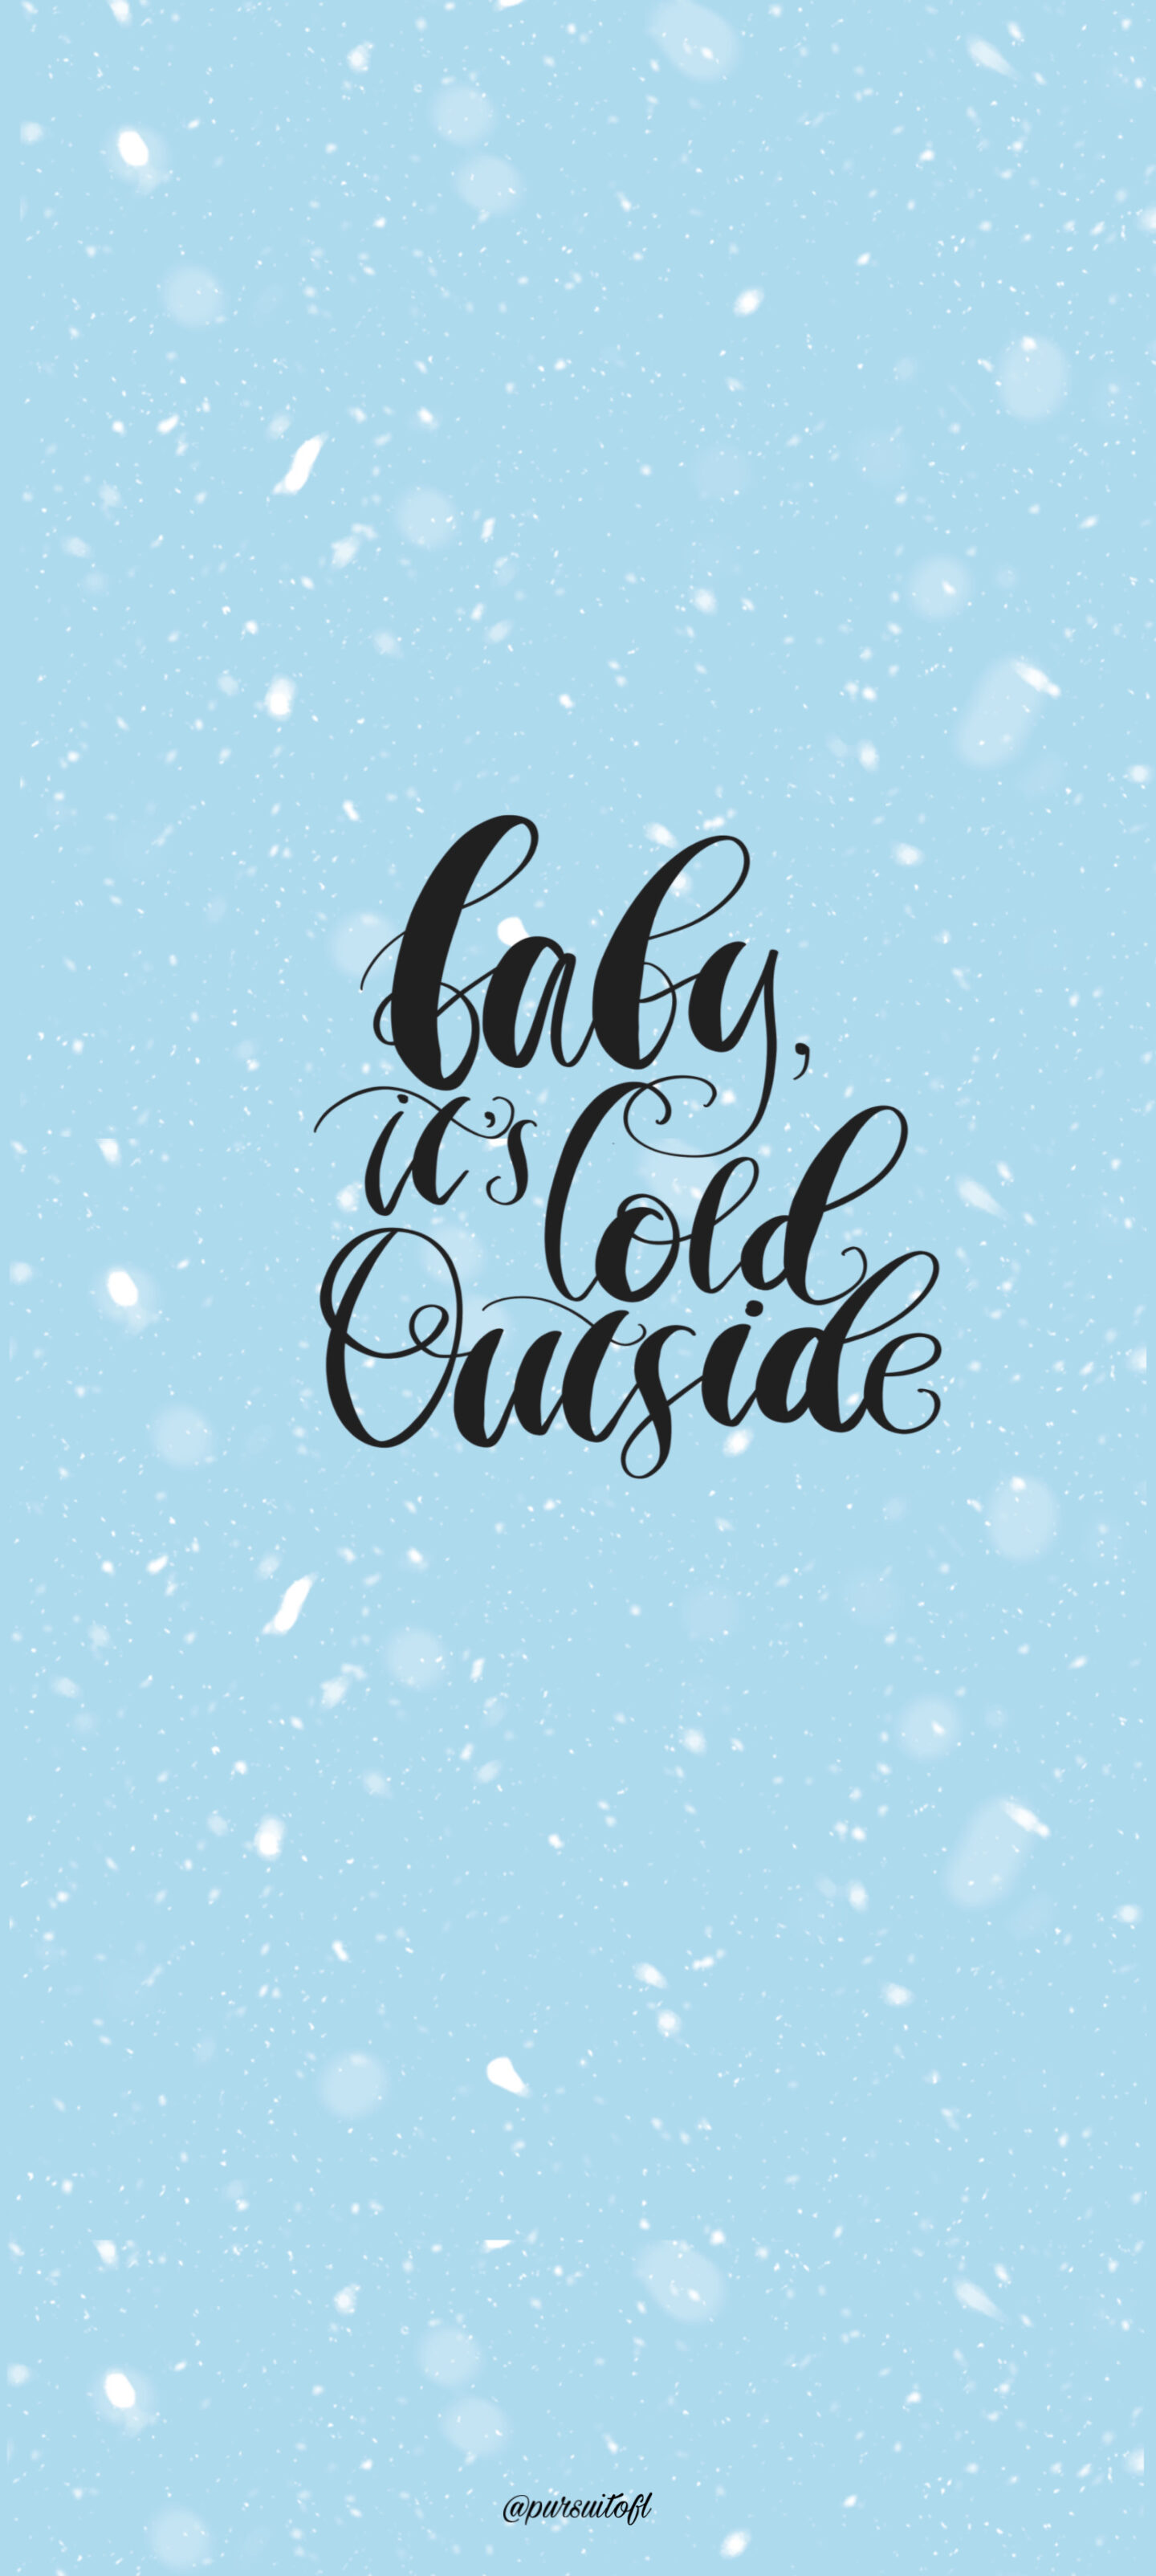 Light Blue Phone Wallpaper with White Snow and Baby It's Cold Outside Text